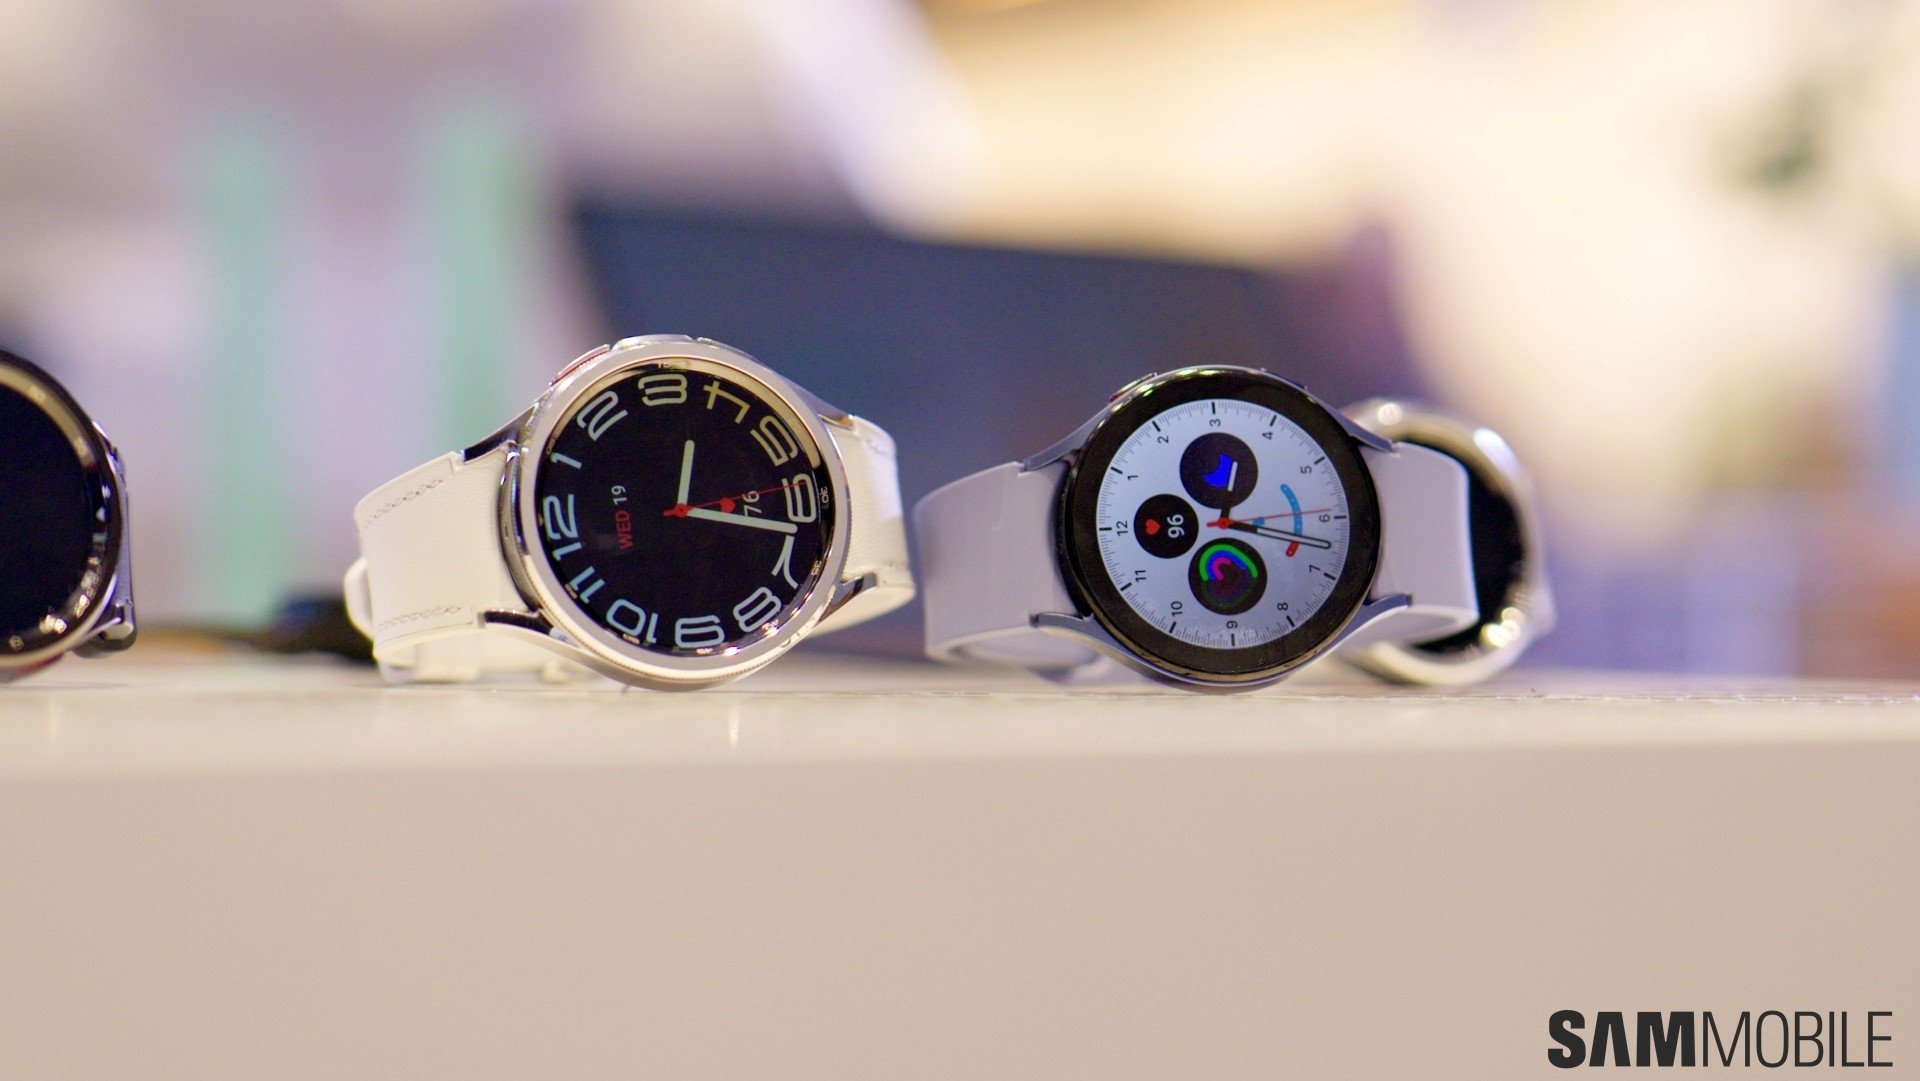 Samsung, it's time to let go of the round smartwatch - SamMobile